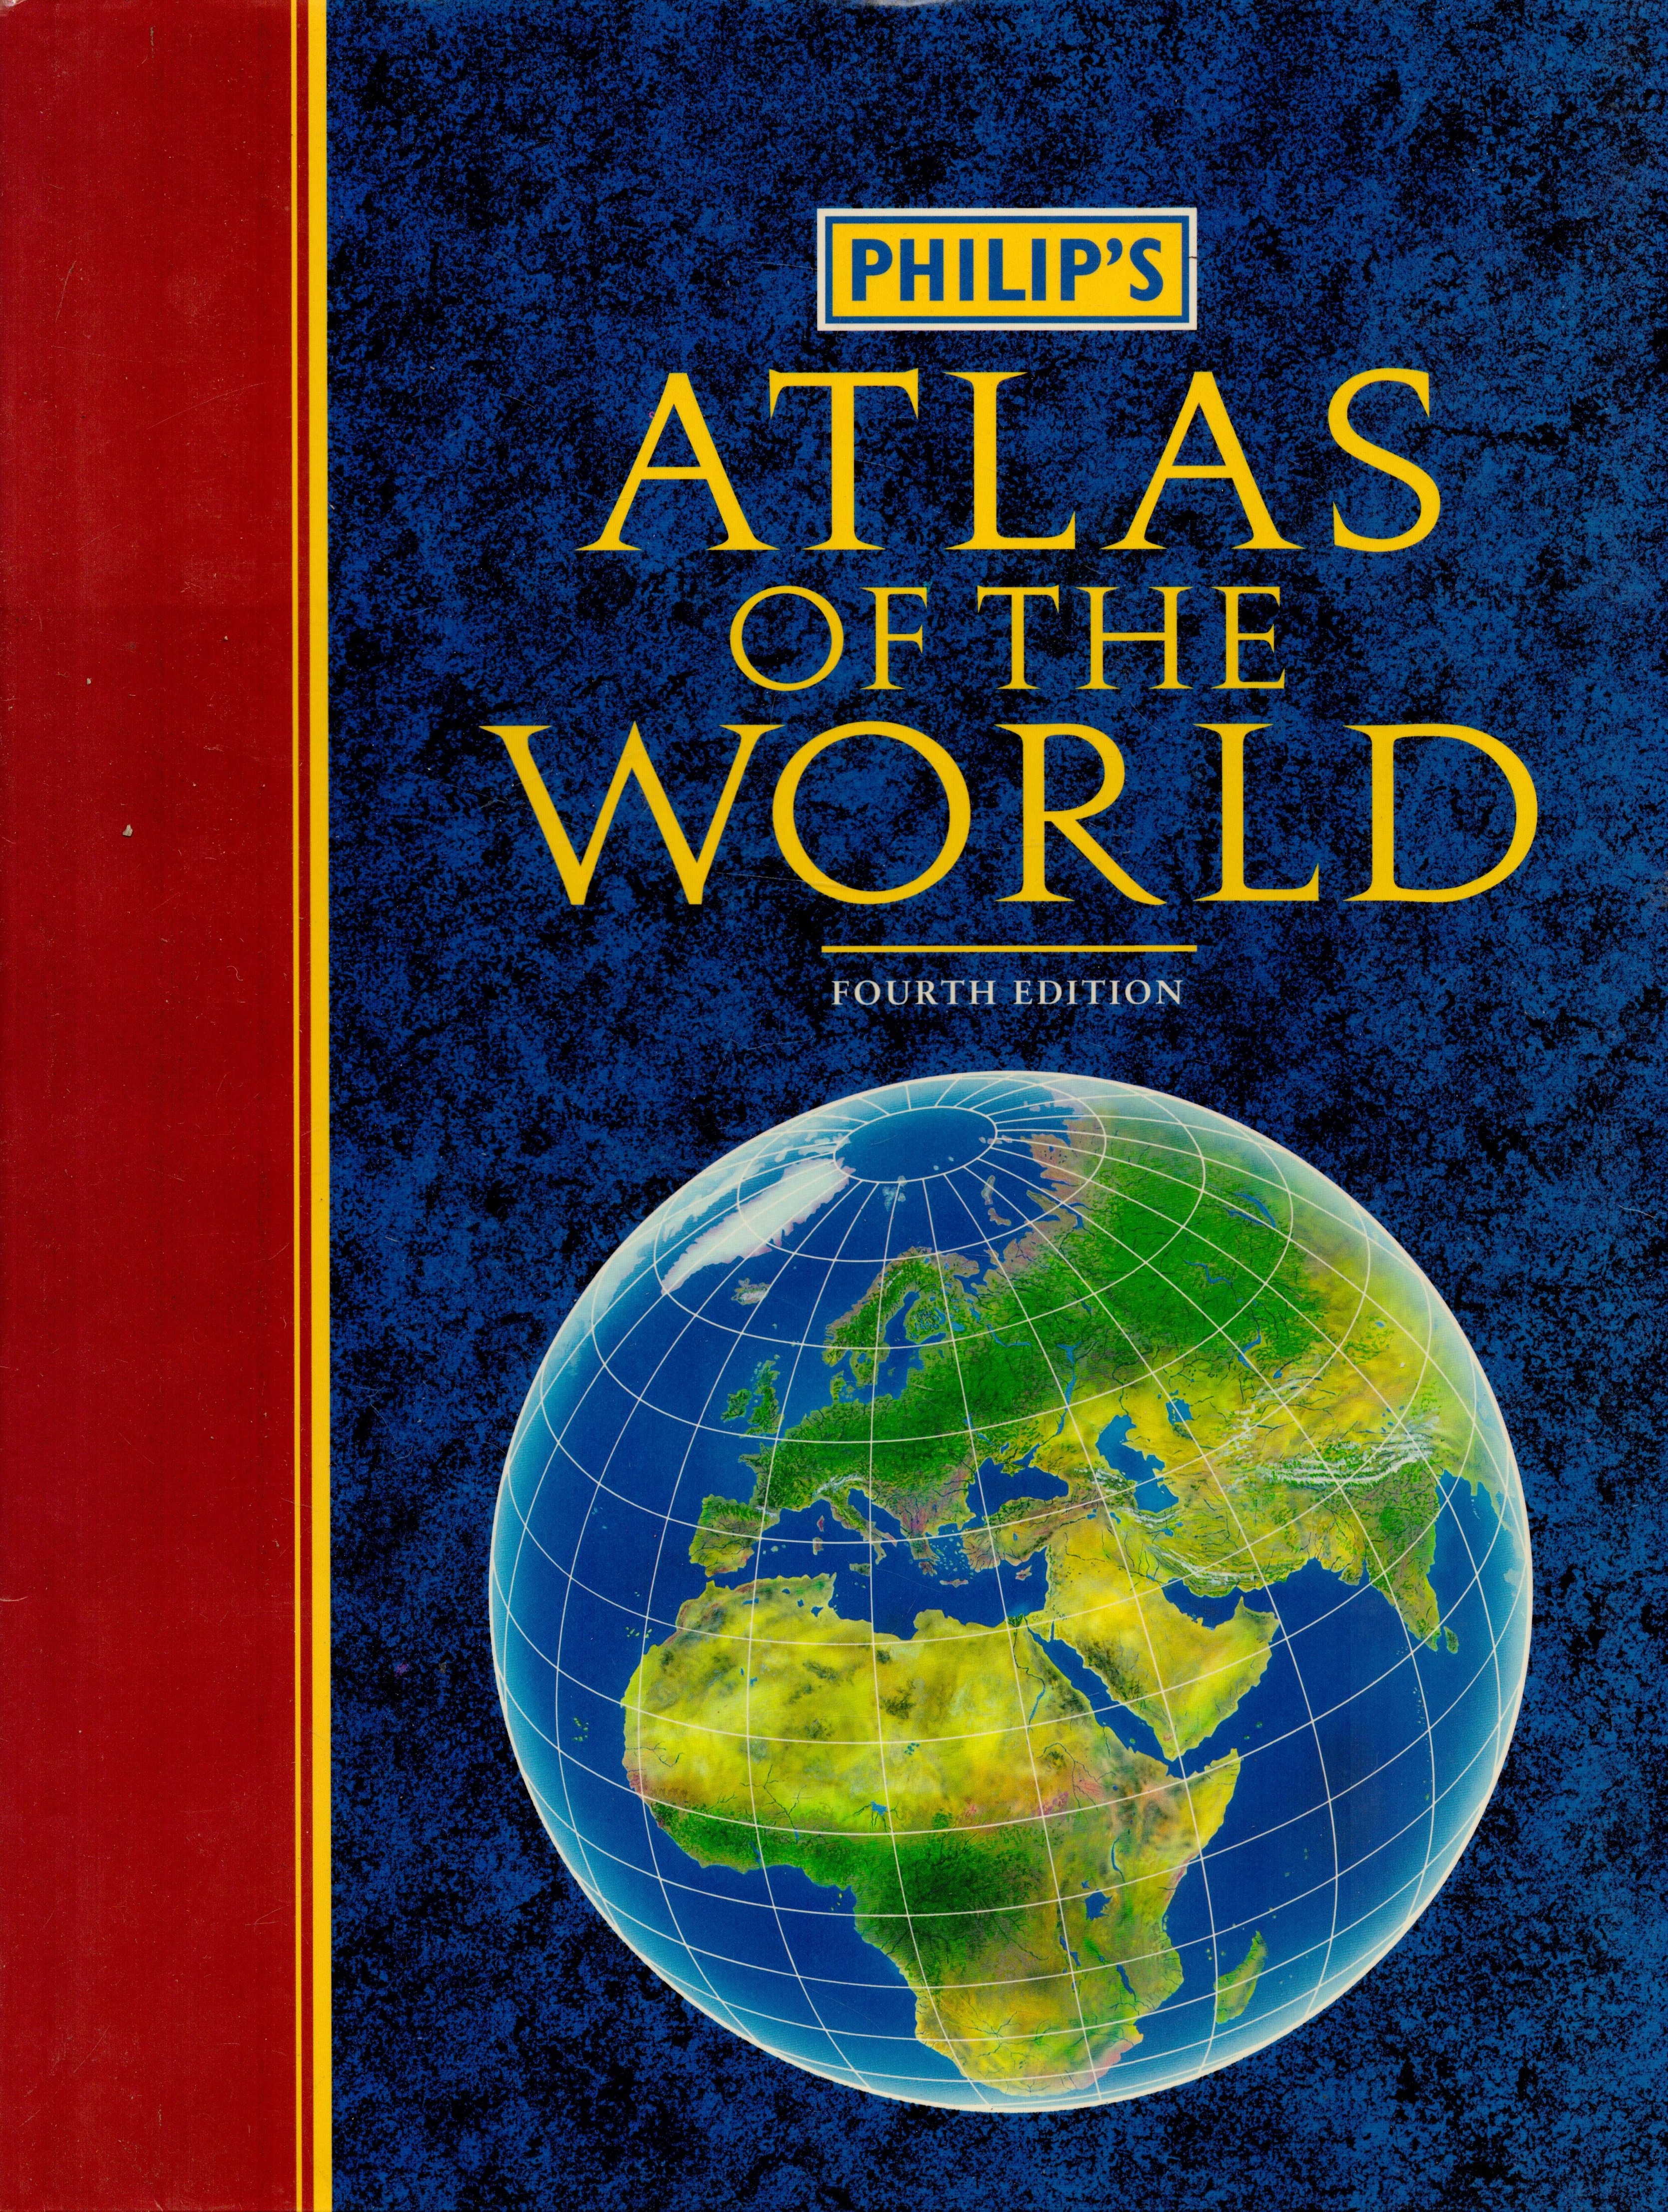 Philips Atlas of the World. 4th edition 1994. This Philips edition contains Philip's finest maps